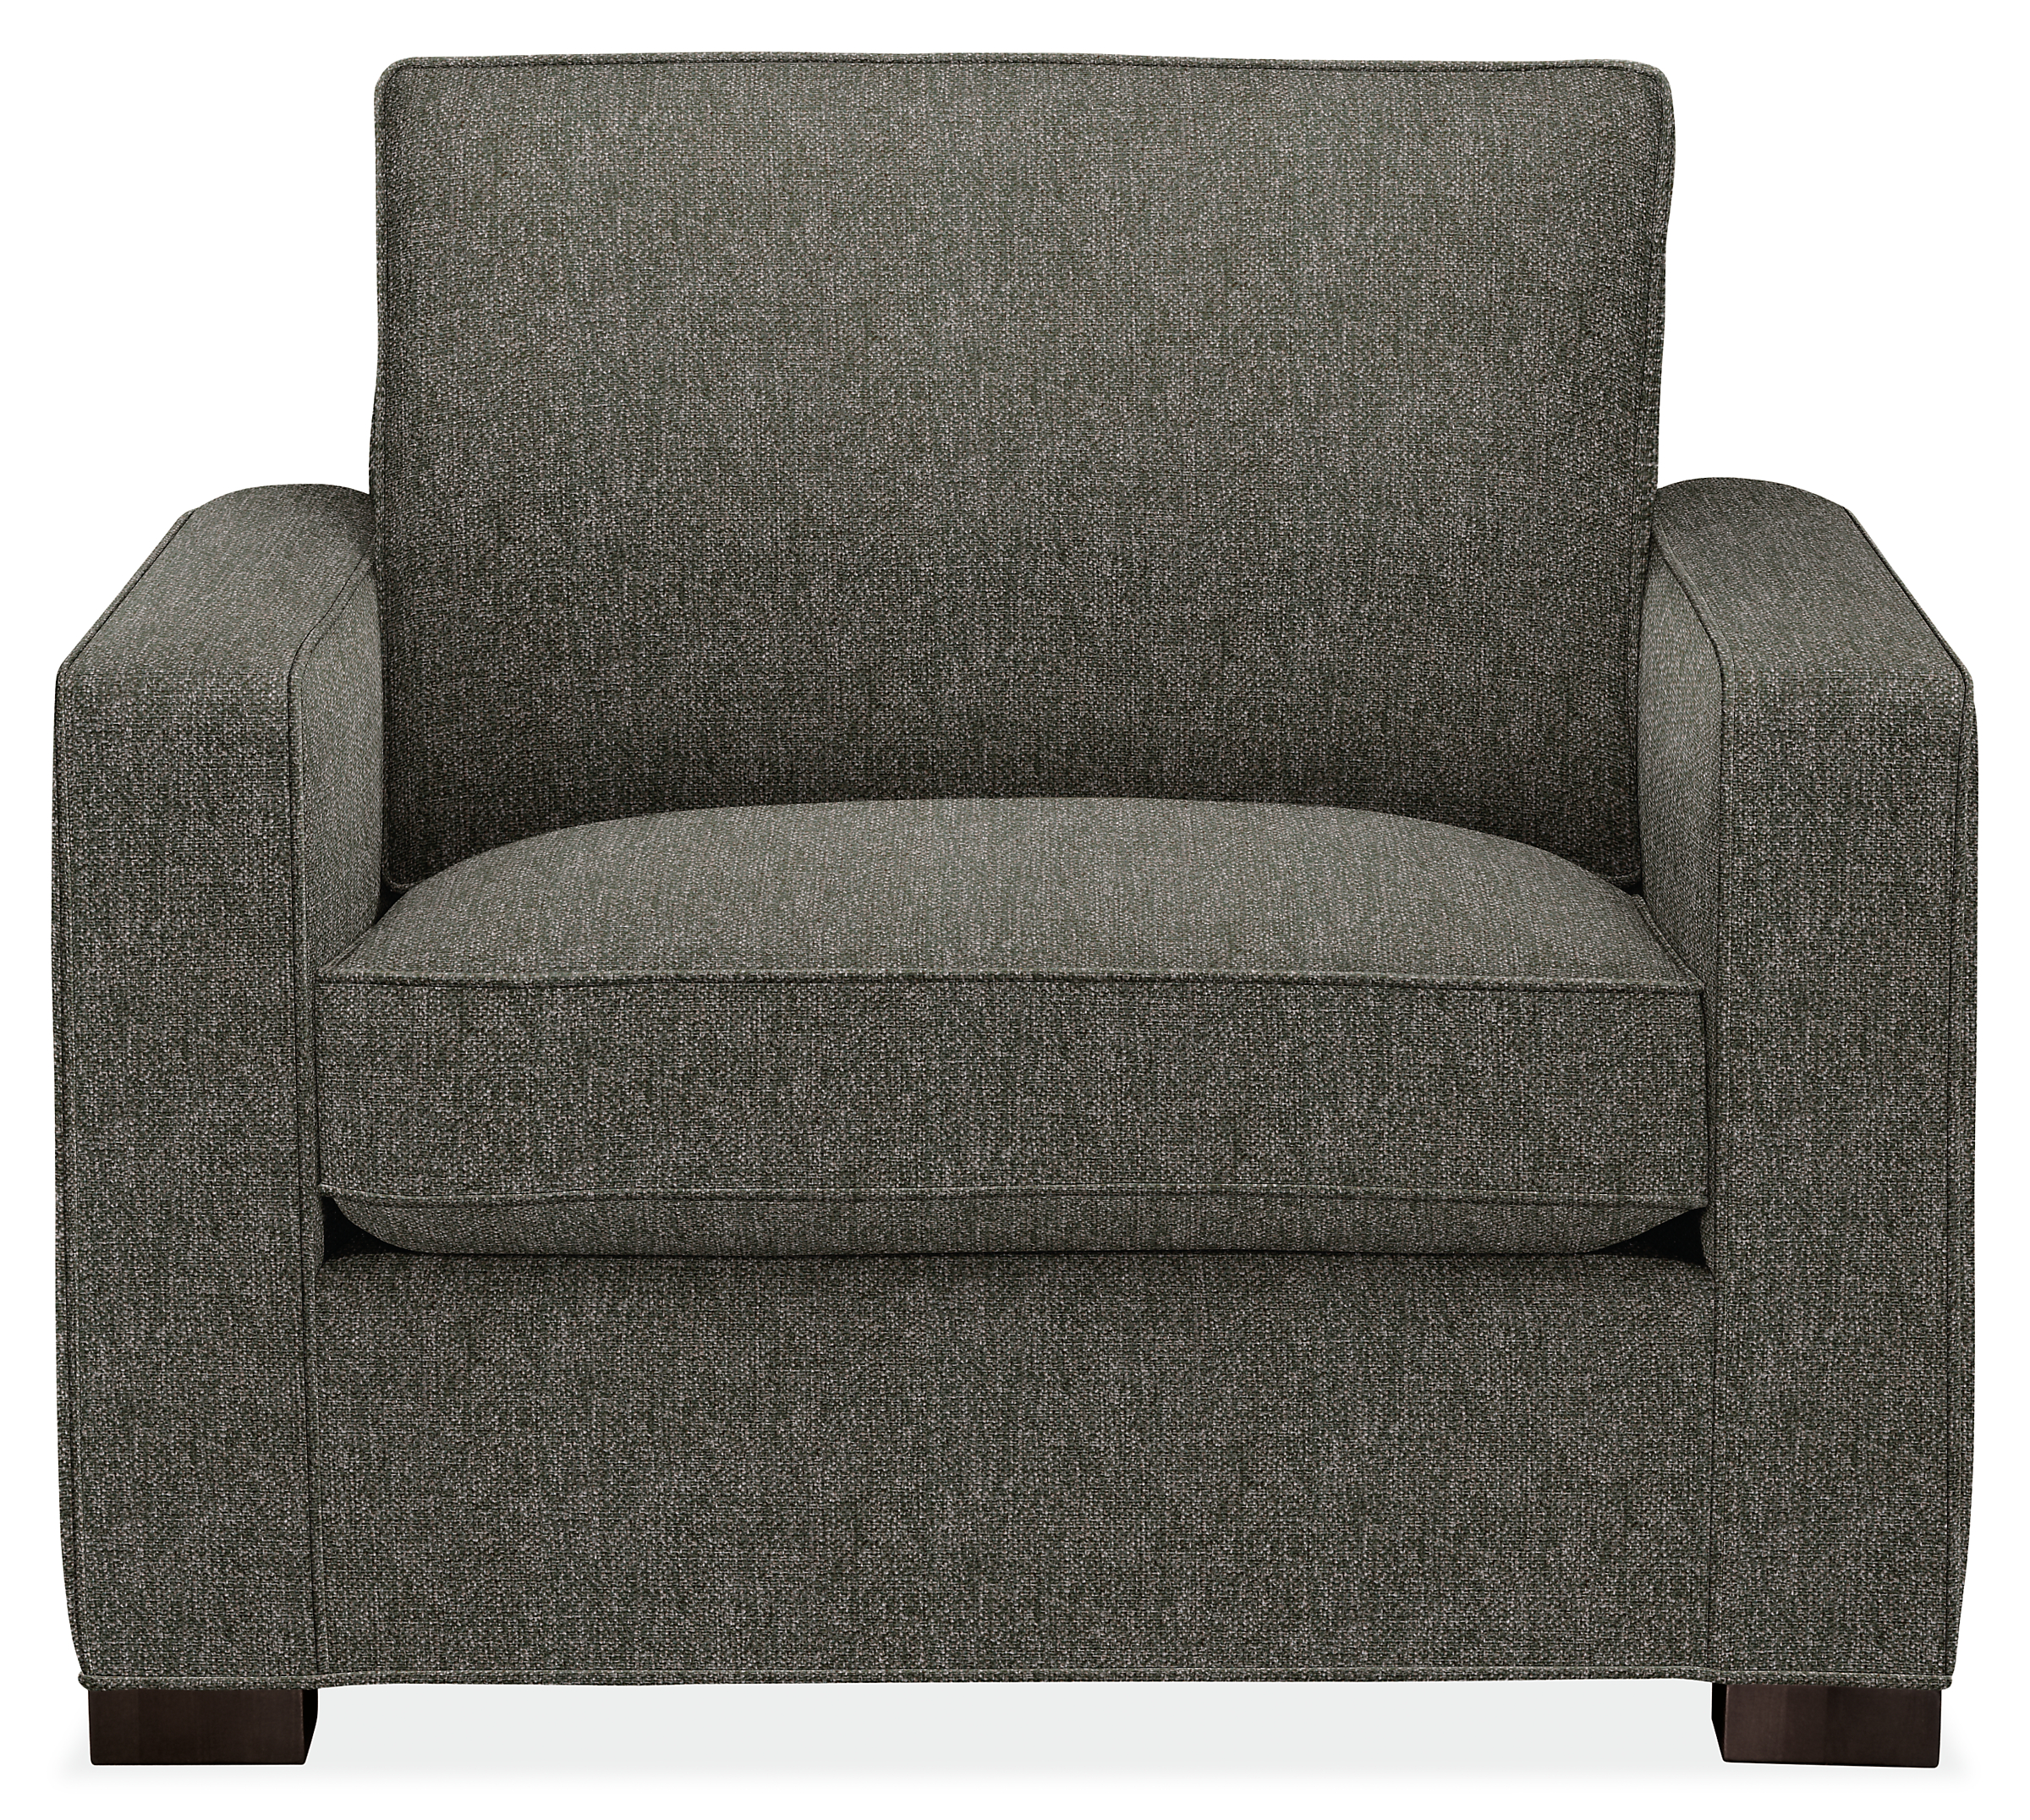 Front view of Morrison Chair in Tepic Charcoal.